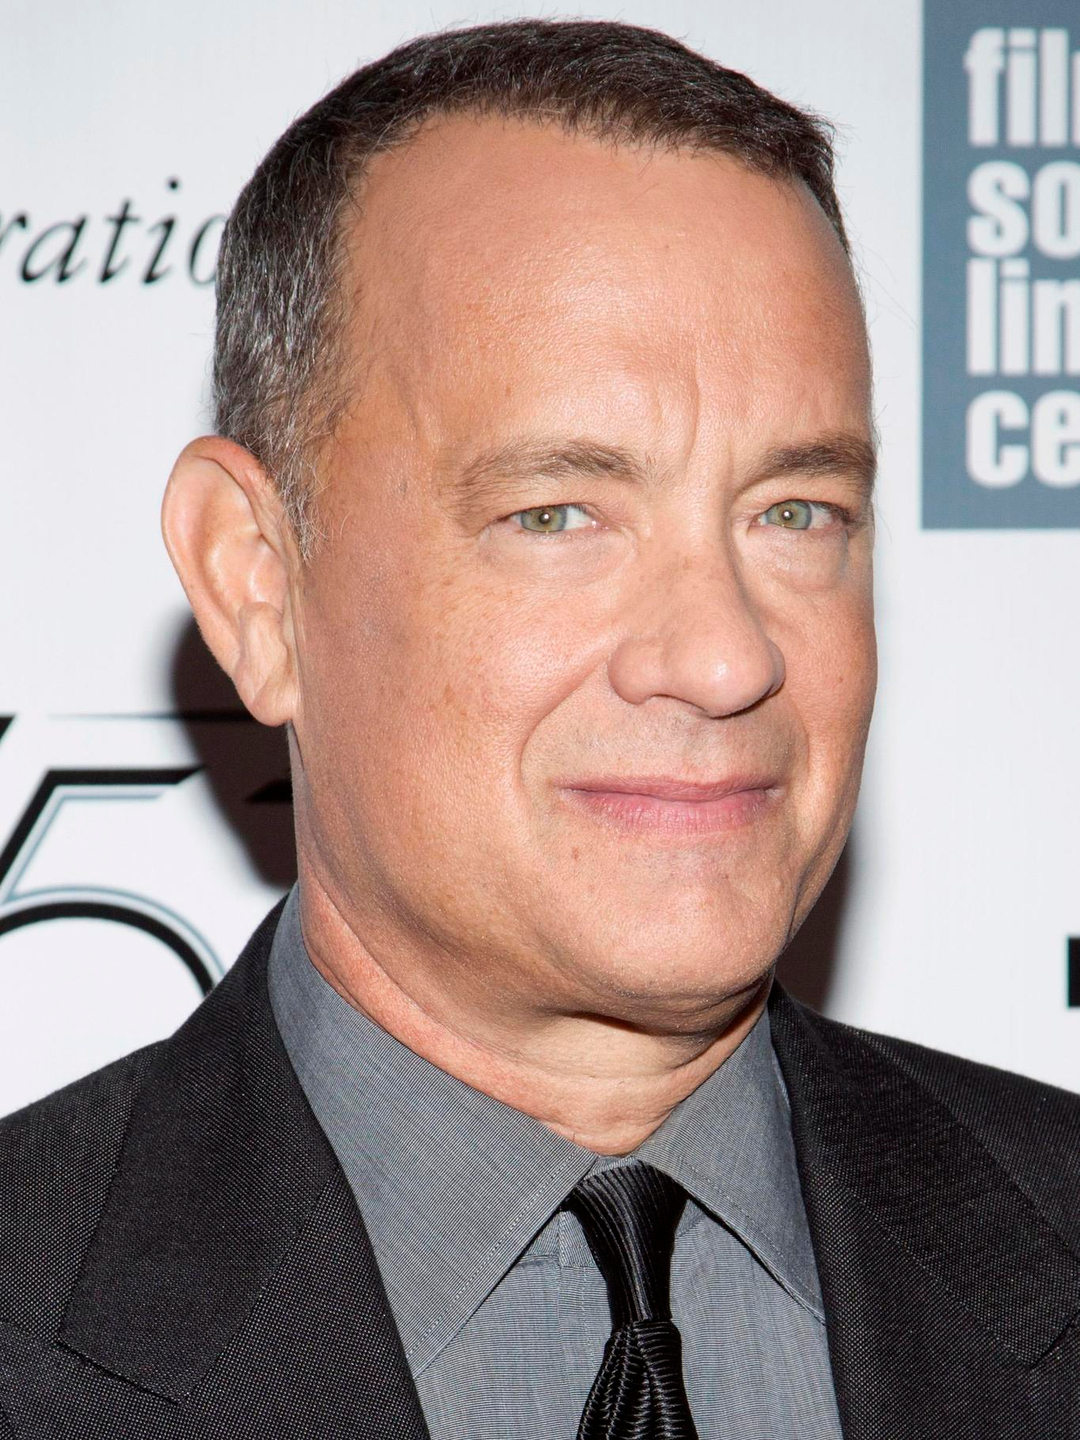 Tom Hanks who is his mother